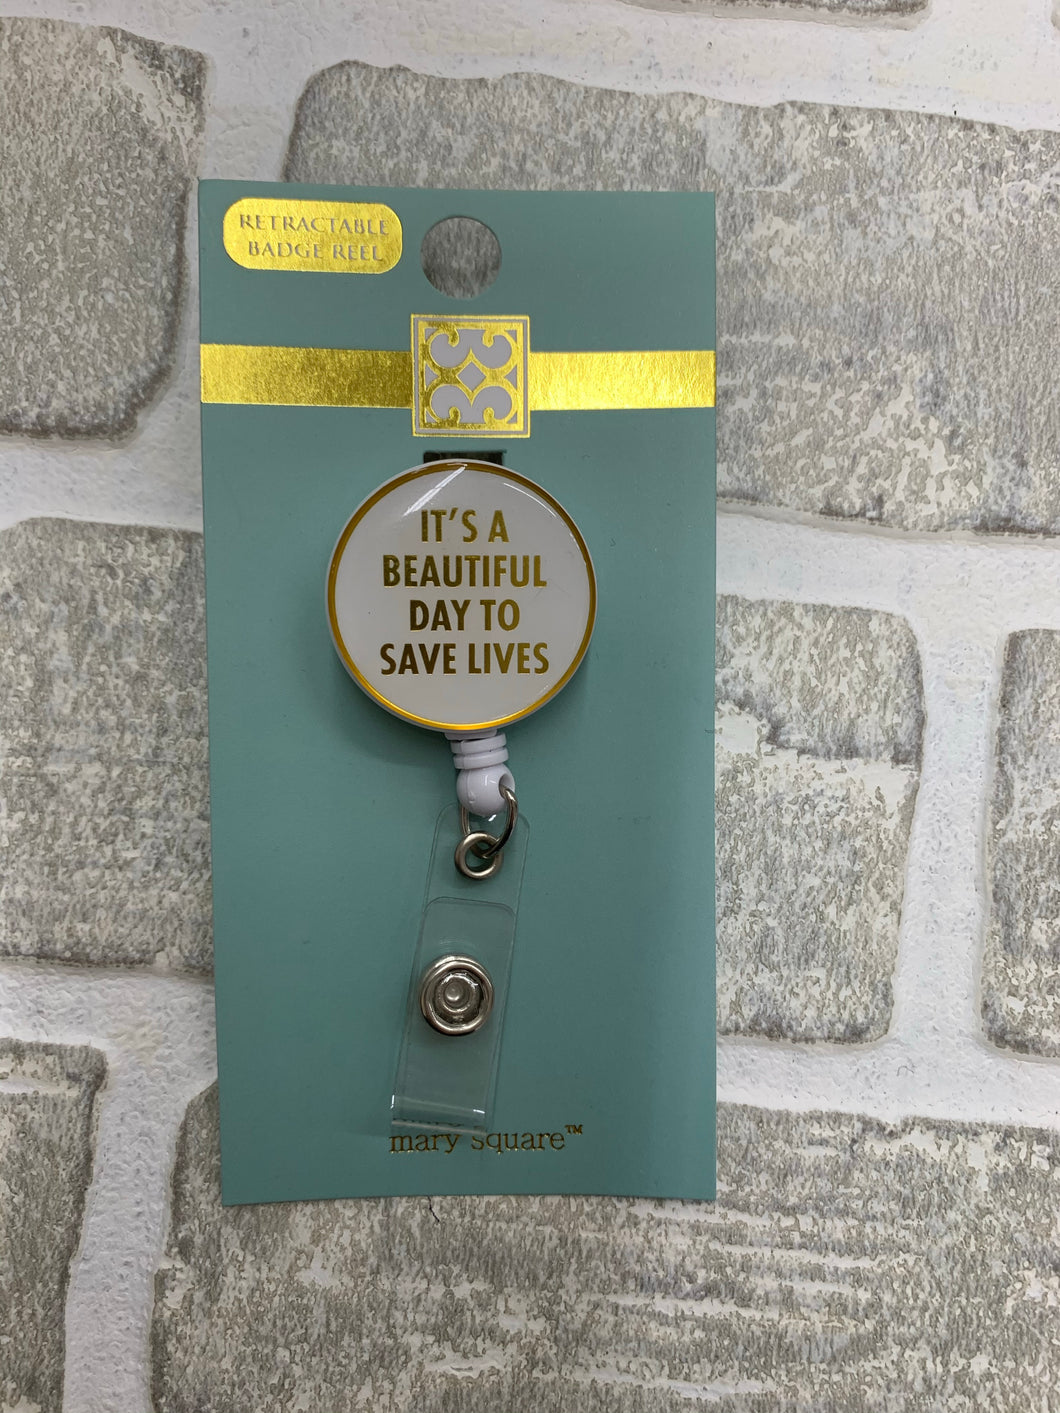 It’s a beautiful day to save lives badge reel